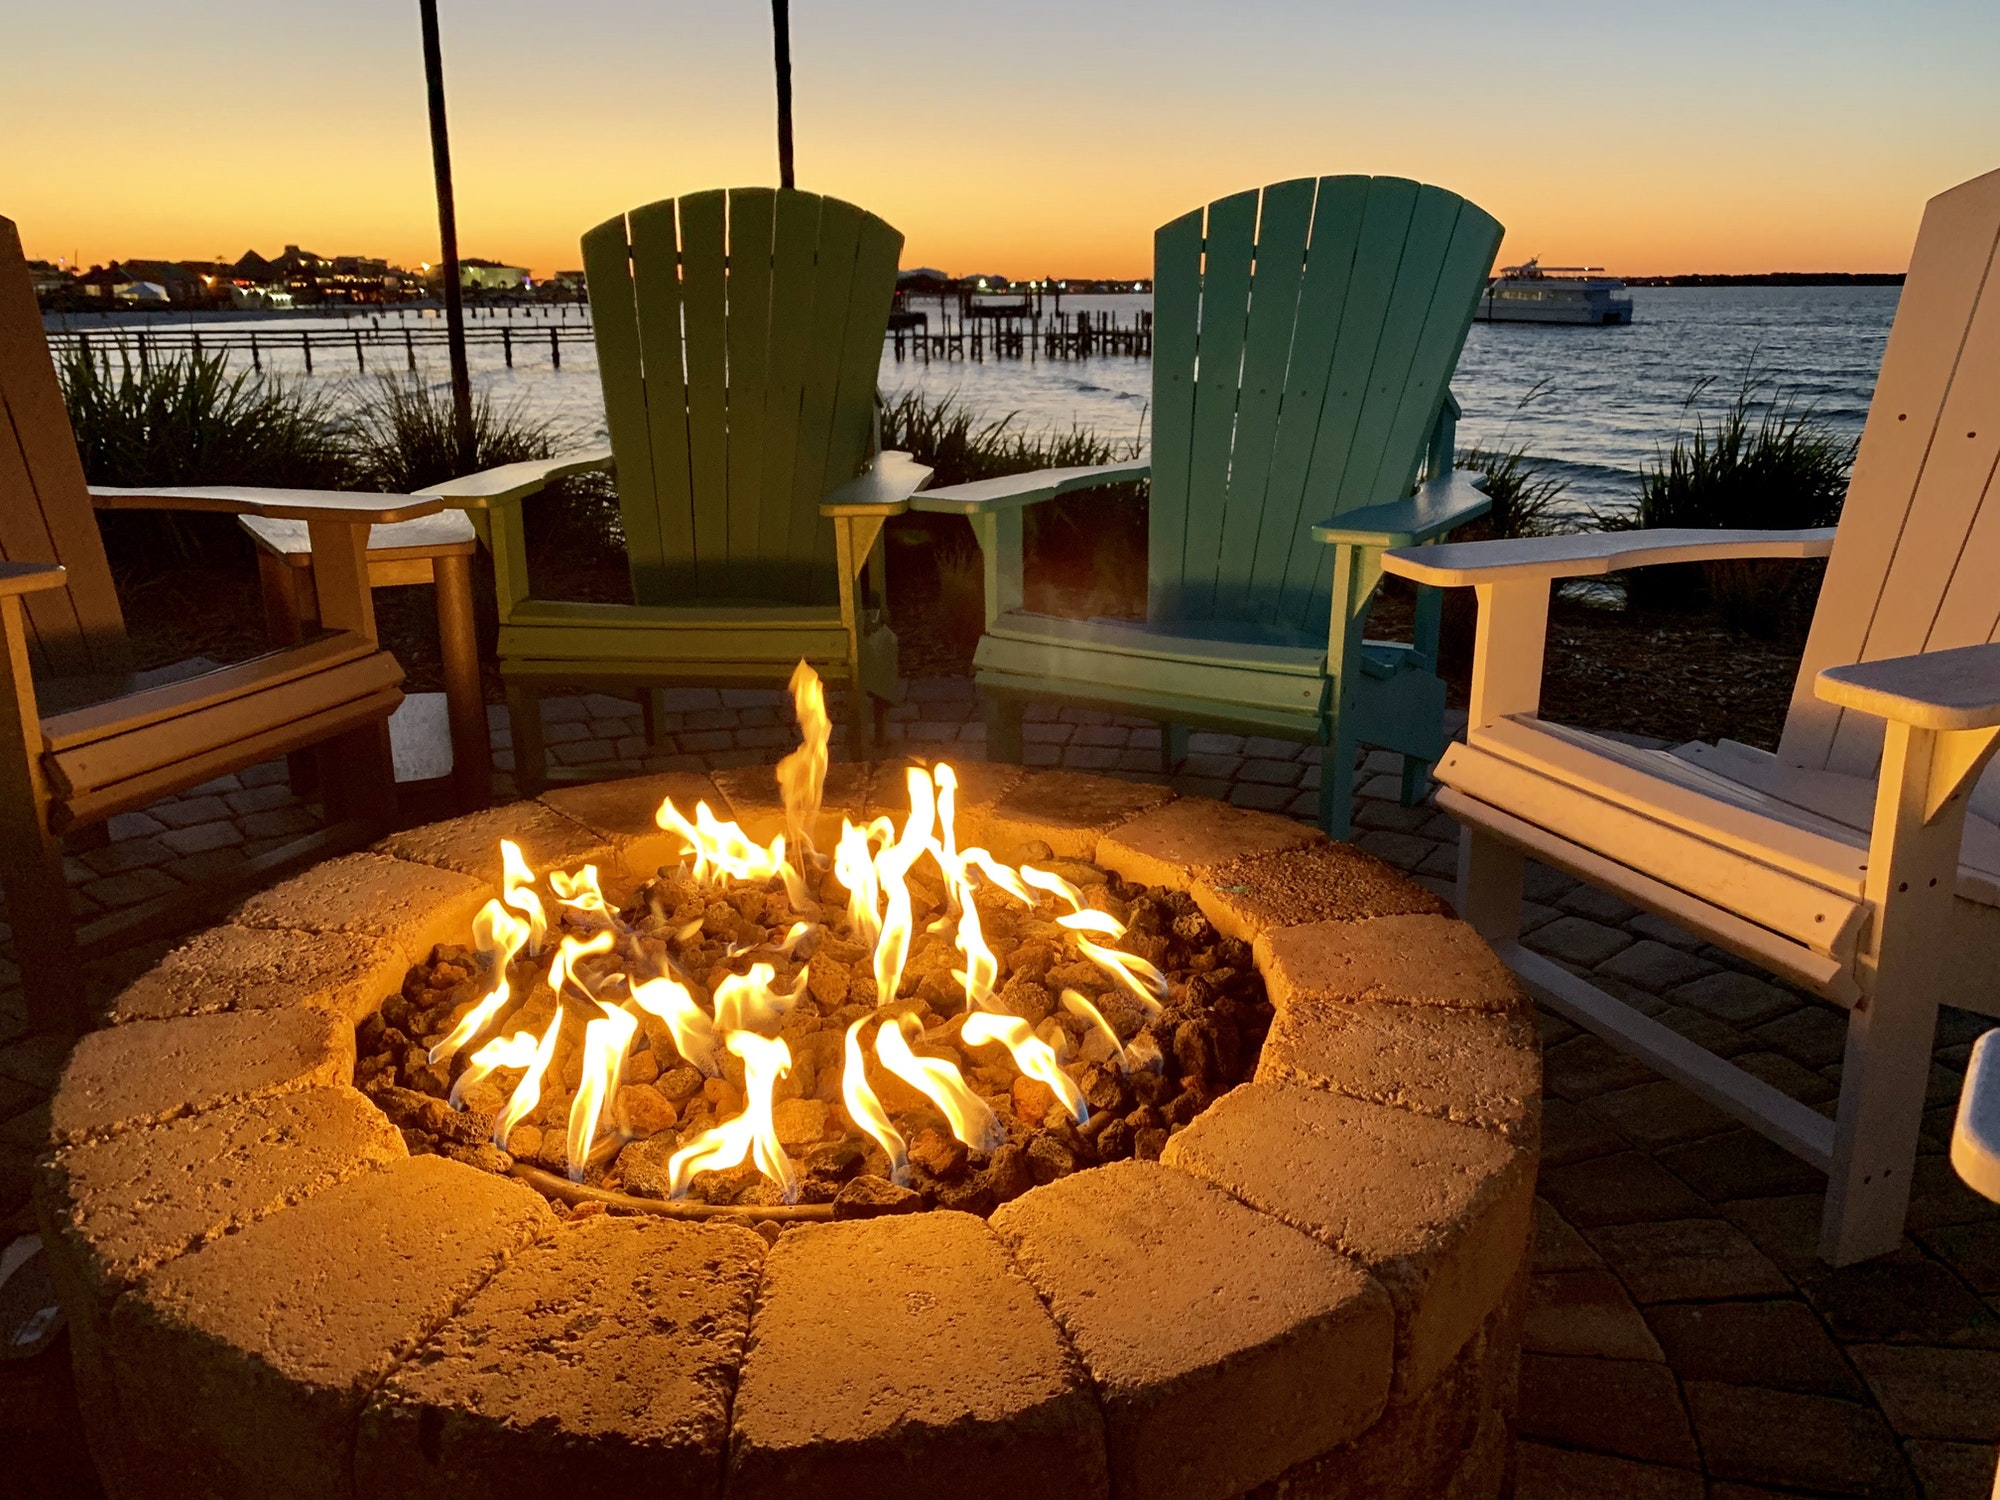 Fire pit by the bay at sunset